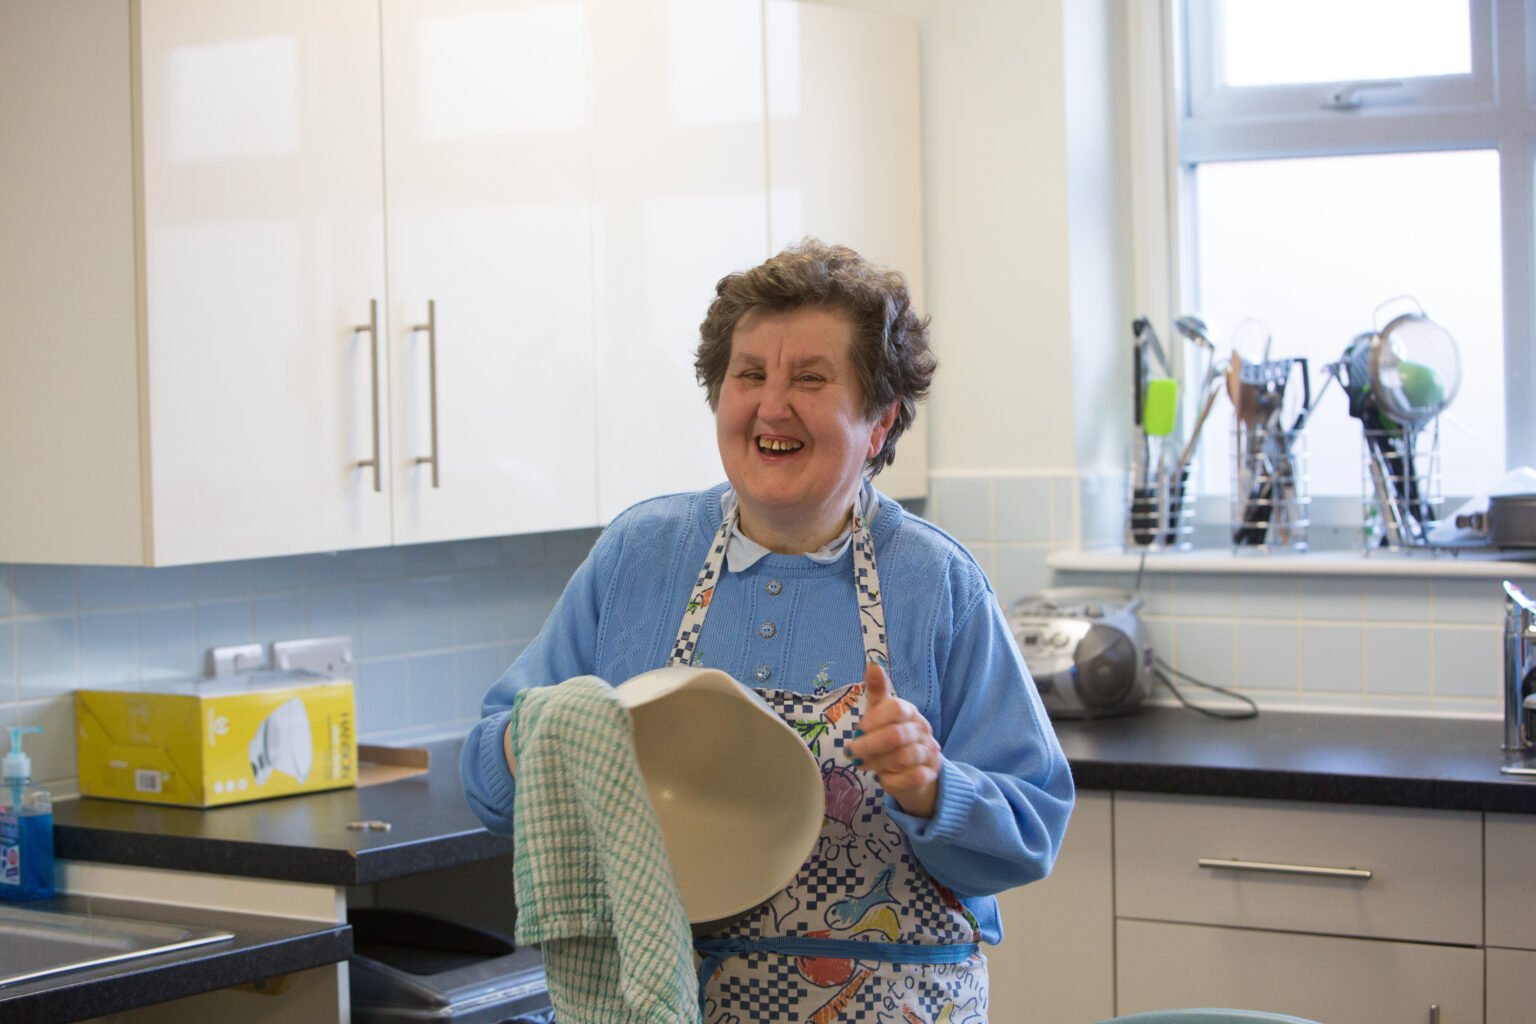 older lady in the kitchen, drying a bowl and smiling